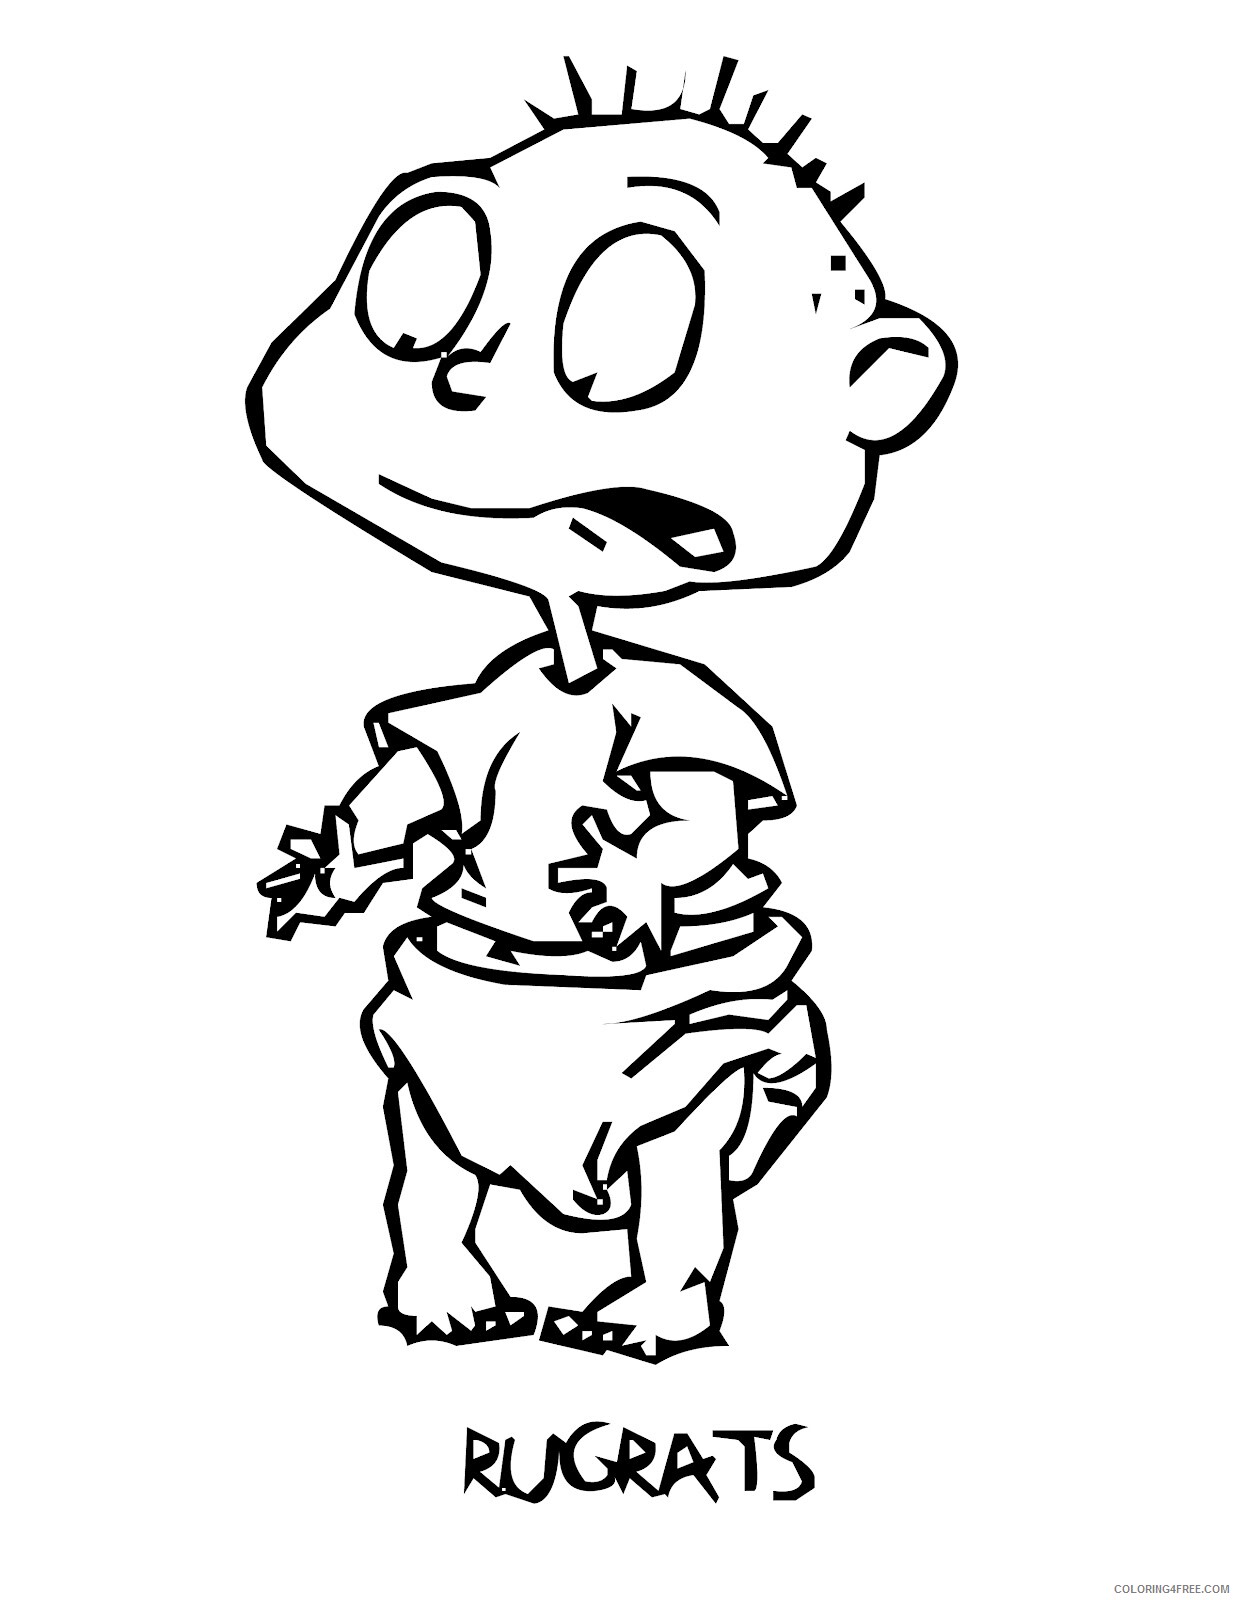 Rugrats Coloring Pages TV Film Printable Rugrats For Kids Printable 2020 07222 Coloring4free